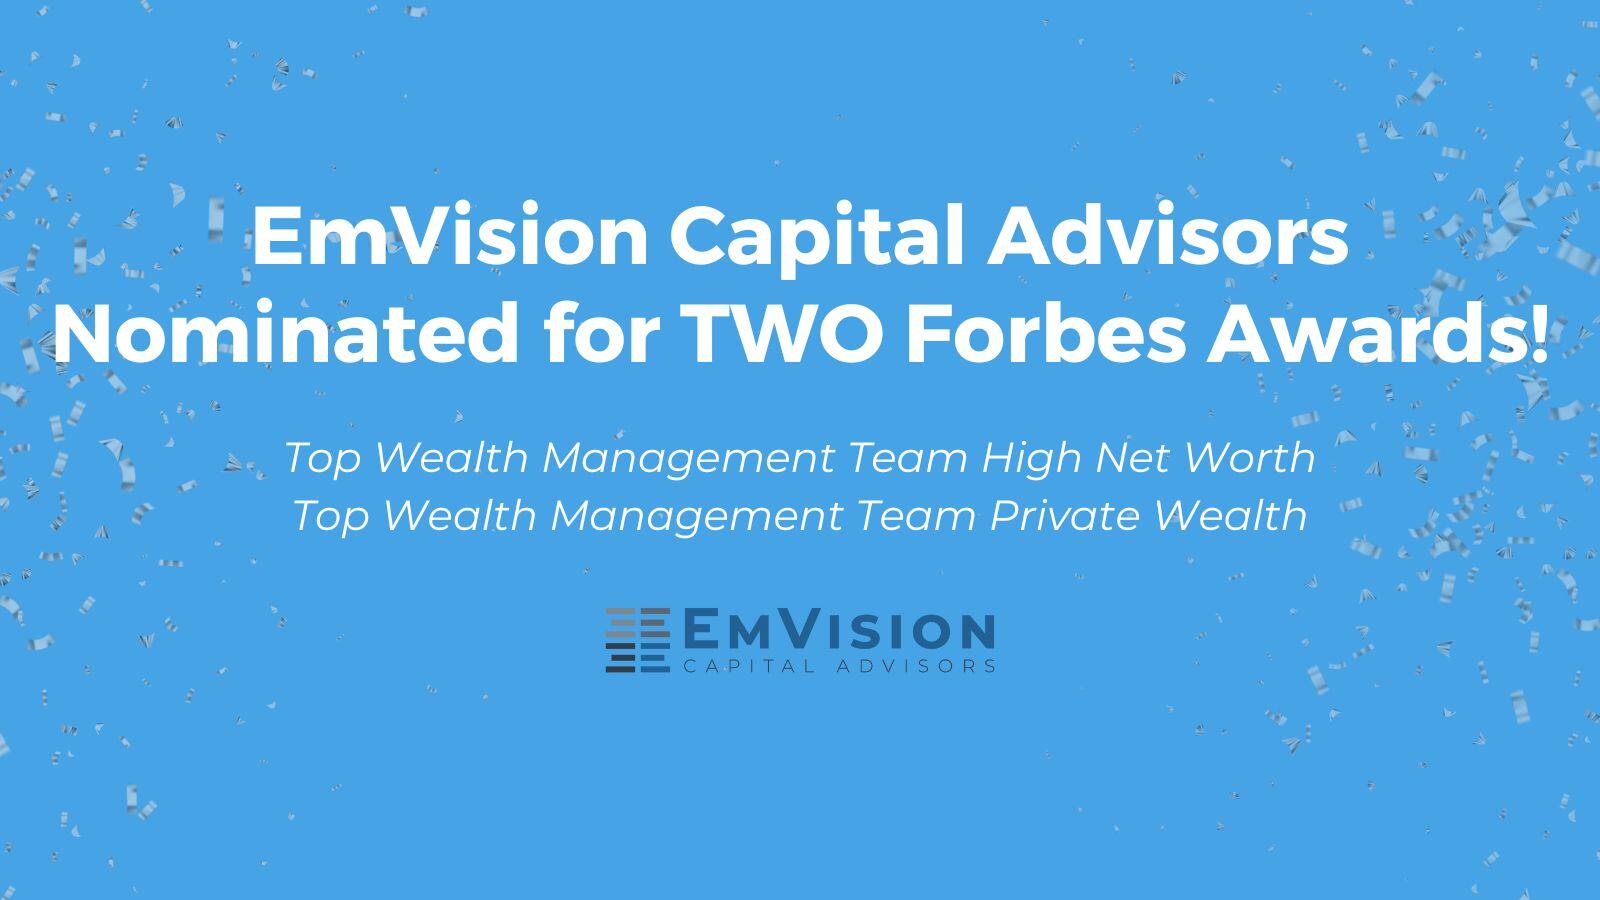 EmVision Capital Advisors Nominated for Two Forbes Awards